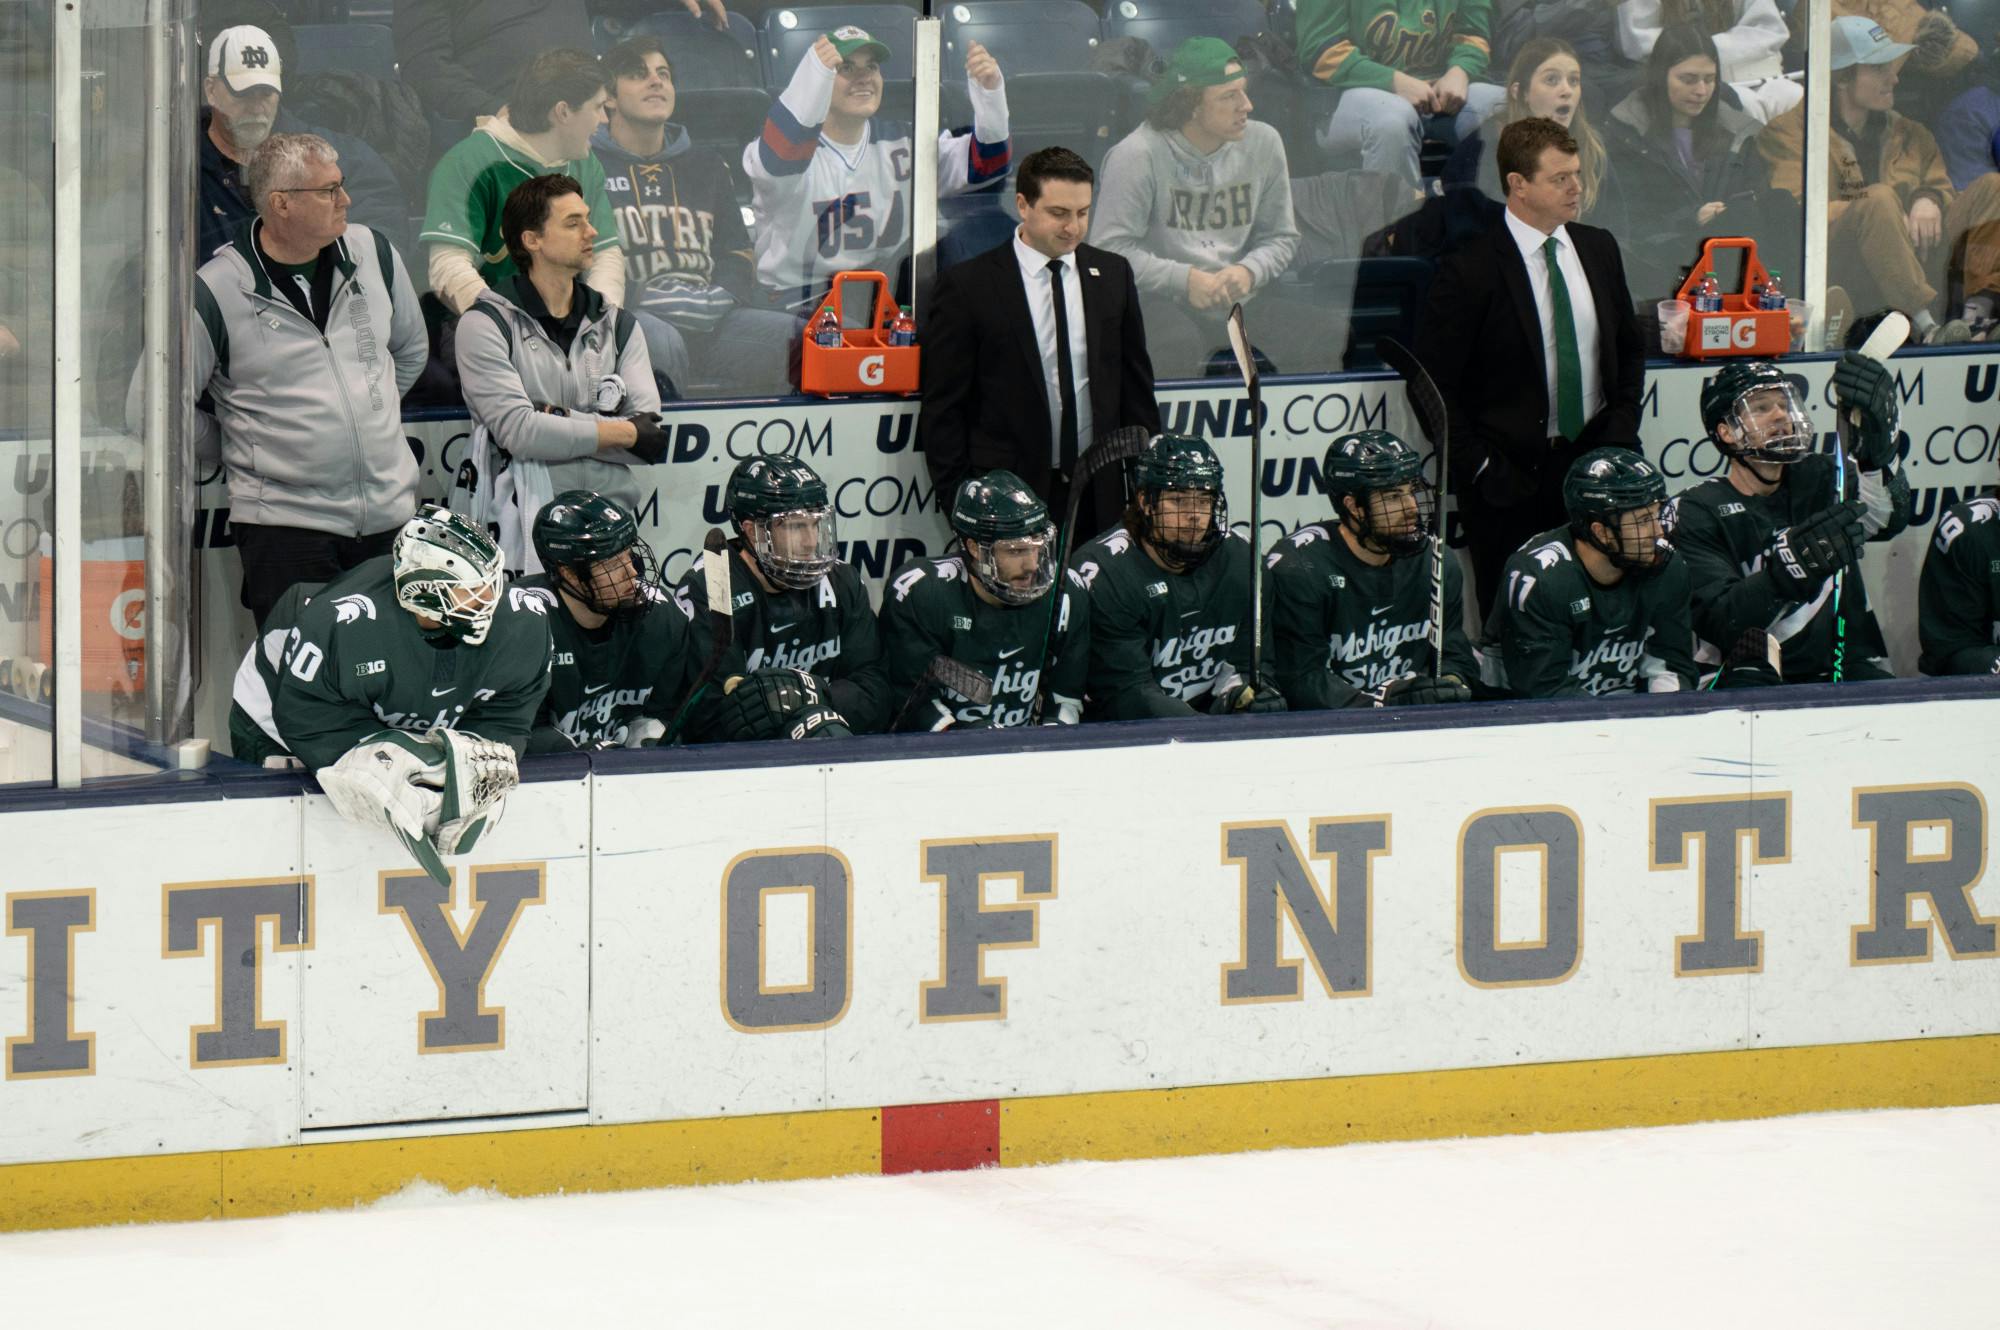 <p>MSU secondary junior goalie Jon Mor leans over the bench, watching the play at Compton Family Ice Arena in Notre Dame, IN on Friday, March 3, 2023. The Spartans fell 1-0 to Notre Dame in the Friday night matchup.</p>